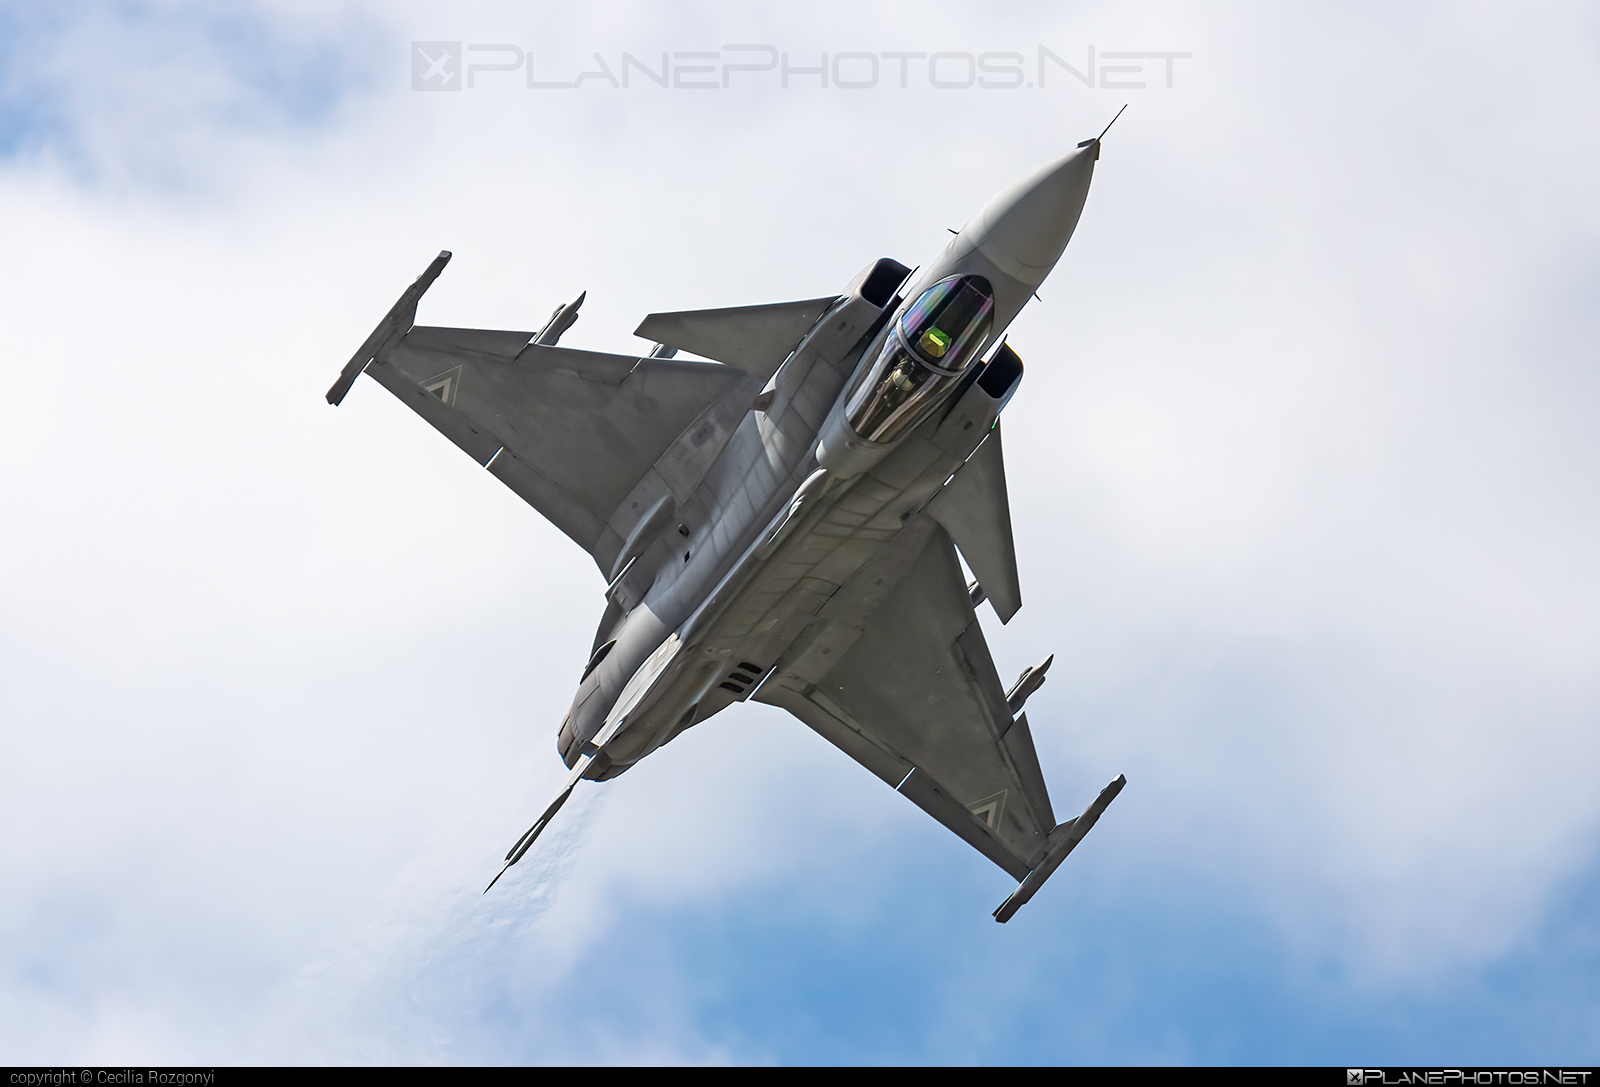 Saab JAS 39C Gripen - 33 operated by Magyar Légierő (Hungarian Air Force) #gripen #hungarianairforce #jas39 #jas39c #jas39gripen #magyarlegiero #saab